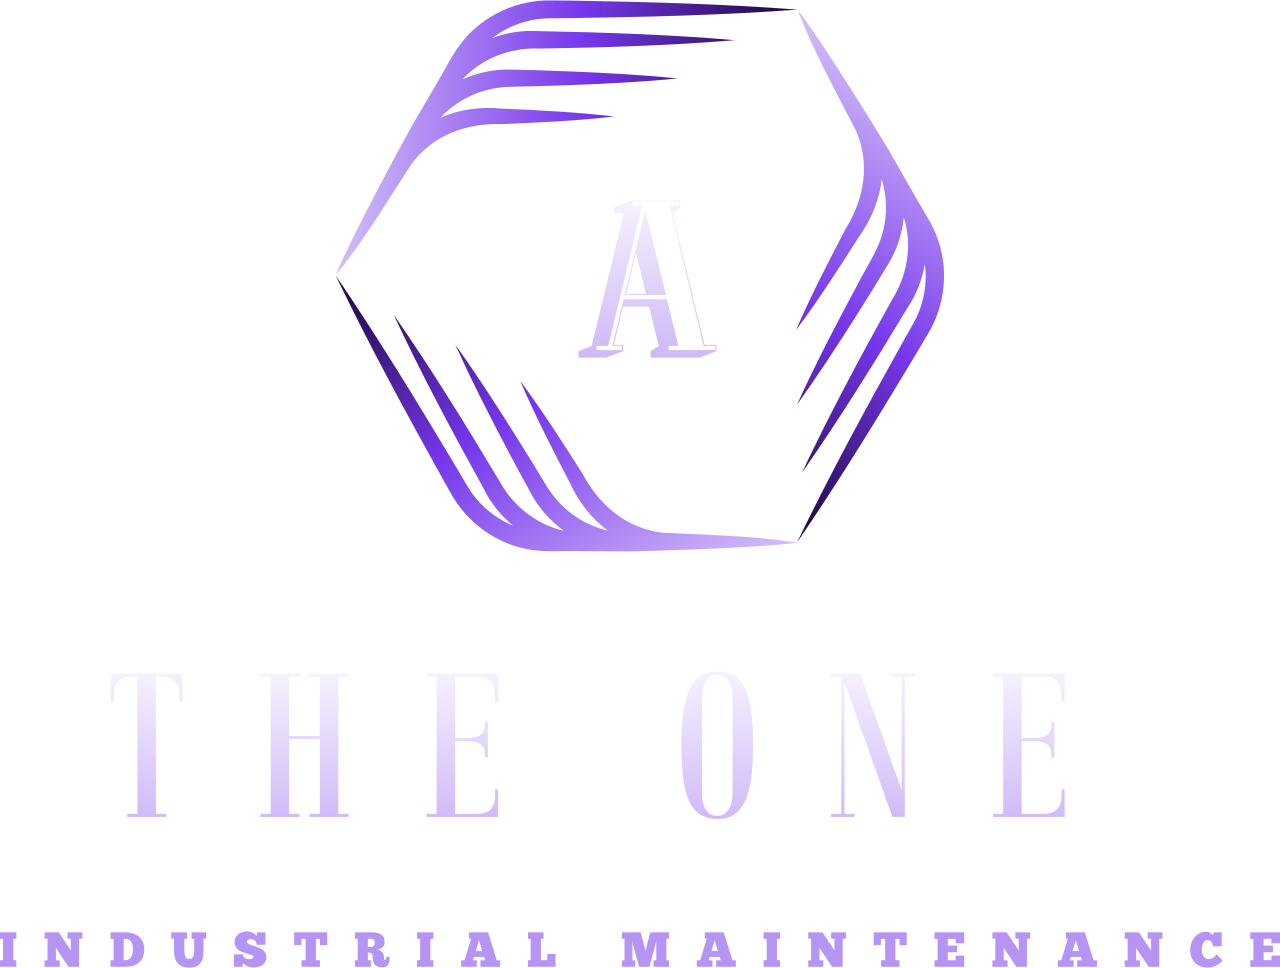 The One 's logo